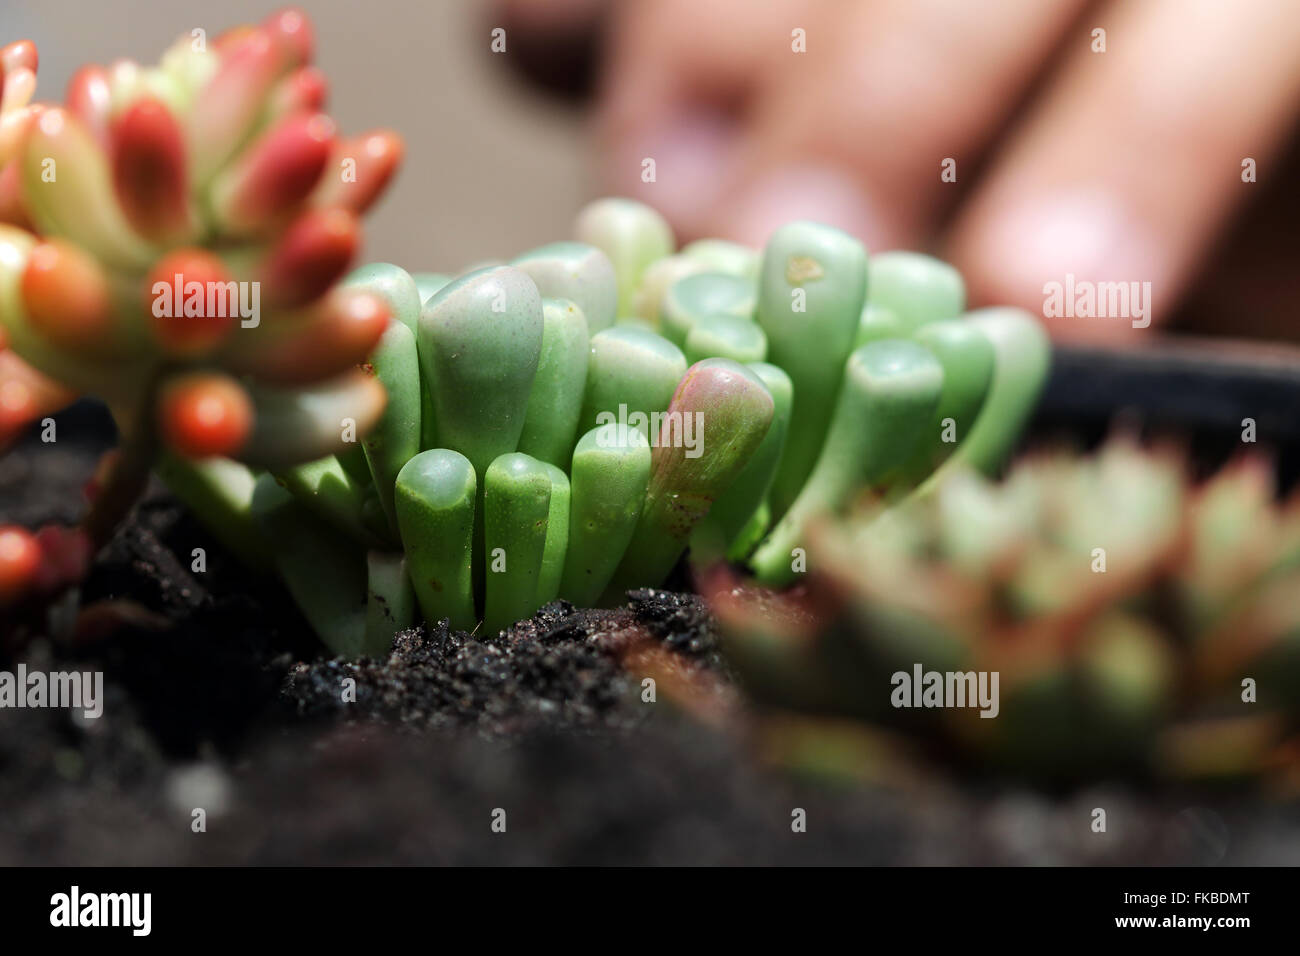 Fenestraria aurantiaca  or known as Babies' toes or window plant Stock Photo